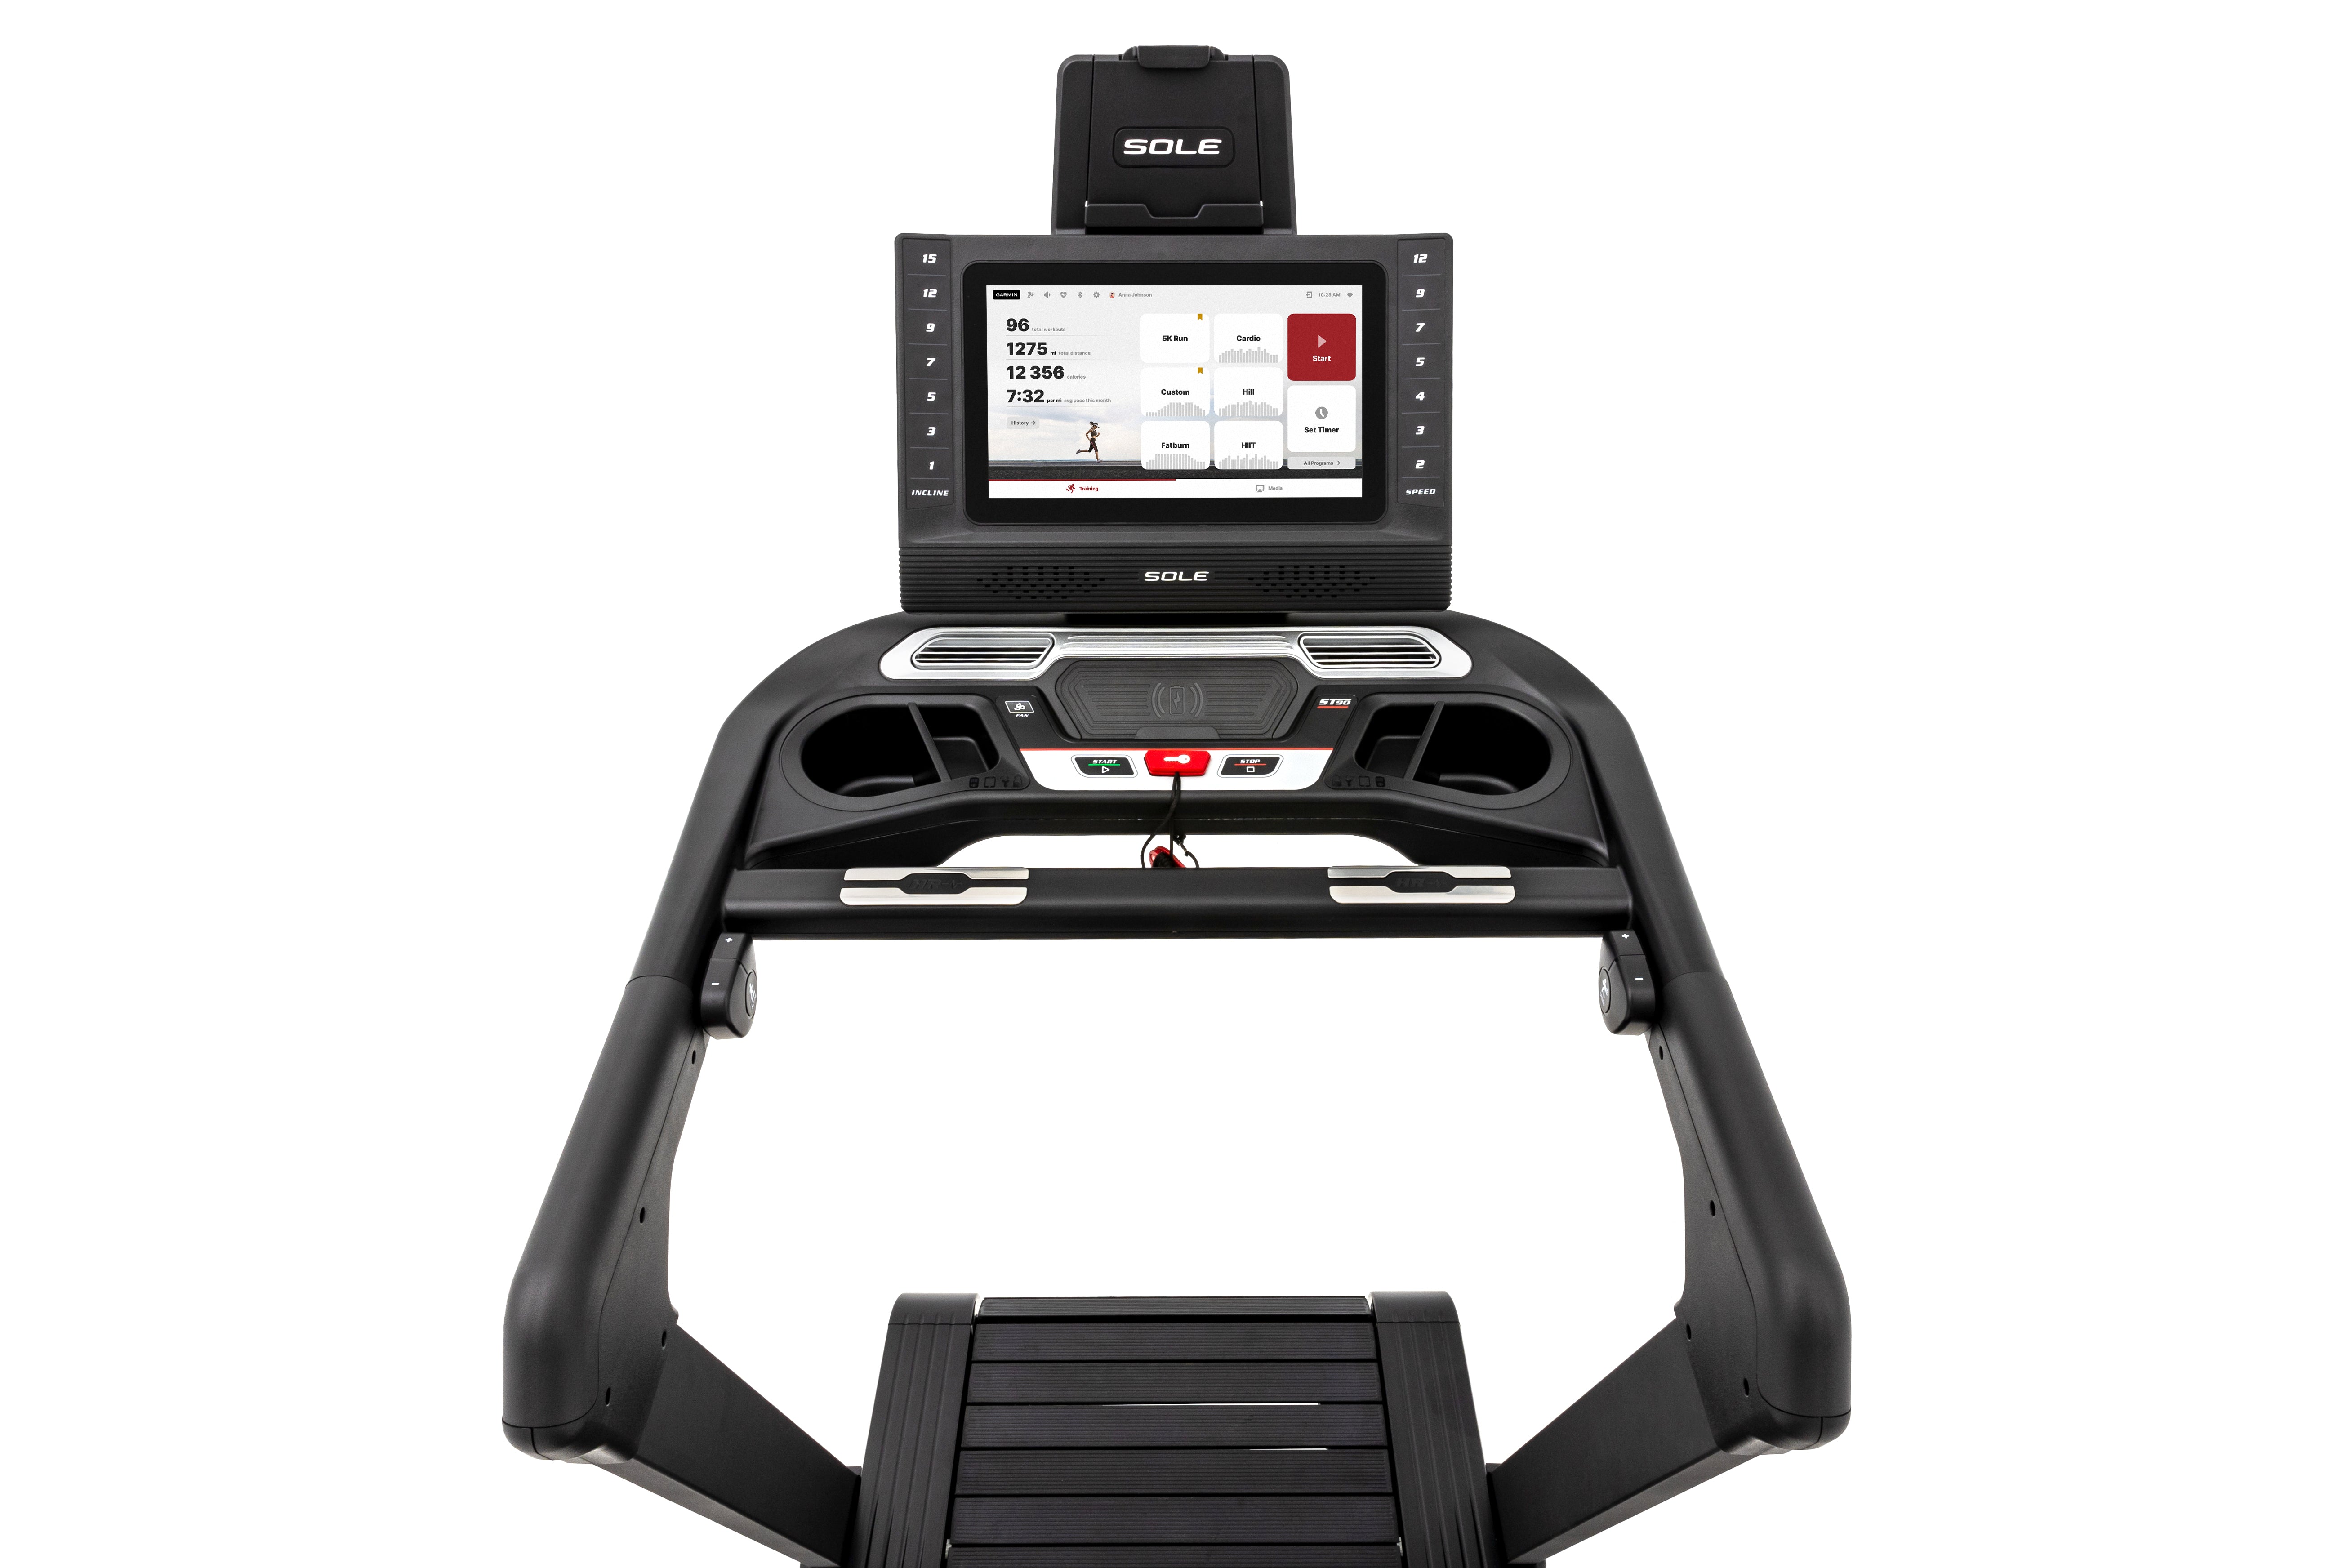 Front and overhead perspective of the Sole ST90 treadmill, showcasing its digital display with workout metrics, control panel, handrails, and a portion of the tread platform, set against a white background.